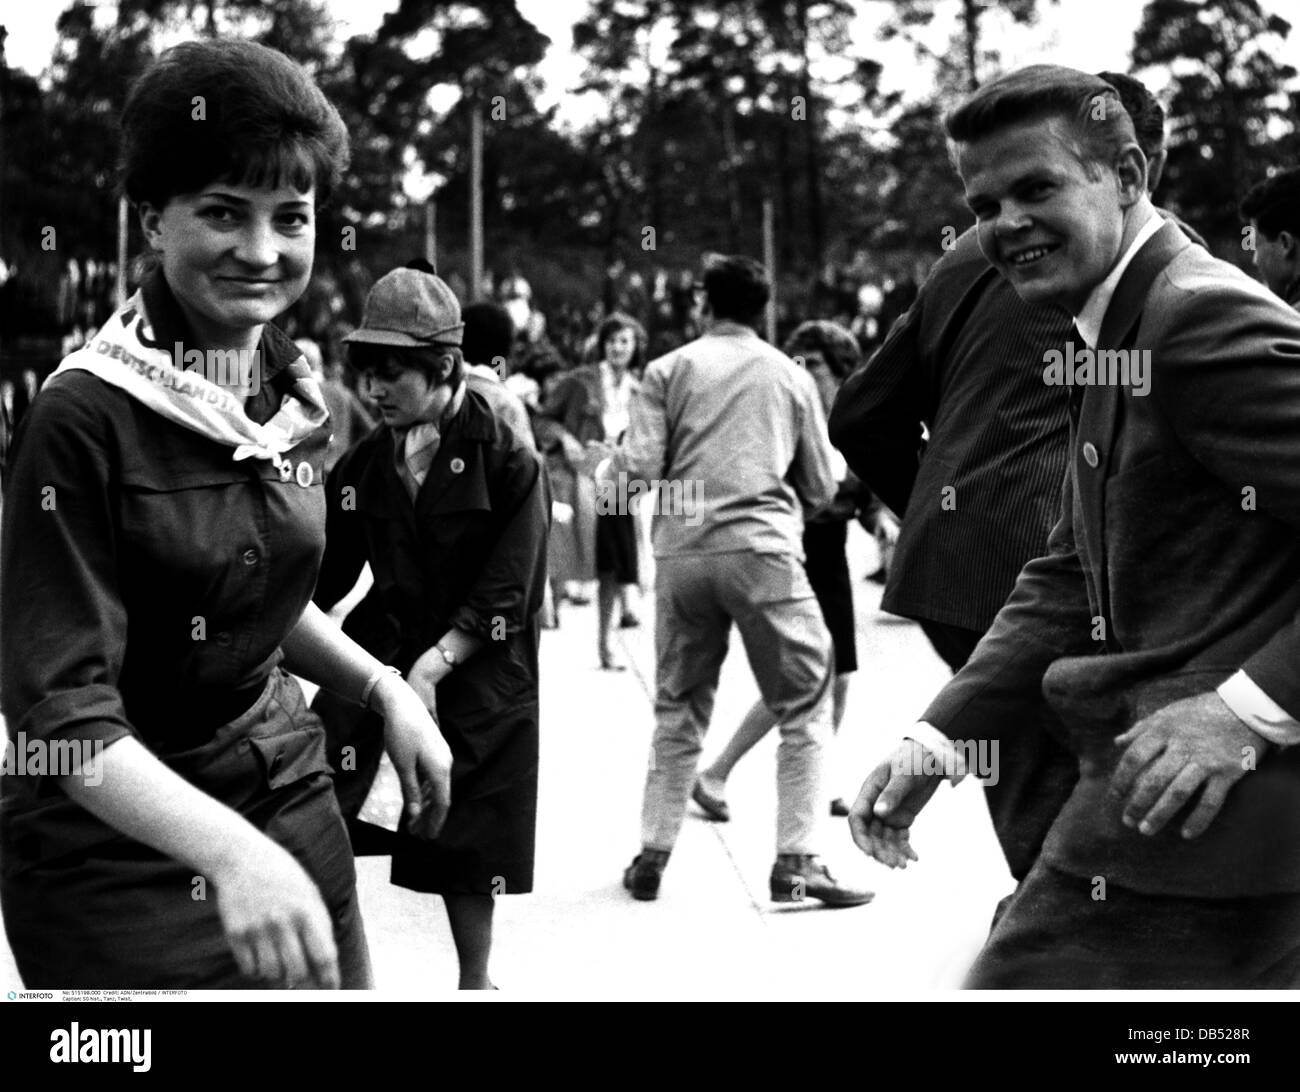 dance, twist, teenager, dancing, celebration of the newspaper 'Junge Welt', during youth festival, Wuhlheide, Berlin, DDR, 18.5.1964, Additional-Rights-Clearences-Not Available Stock Photo